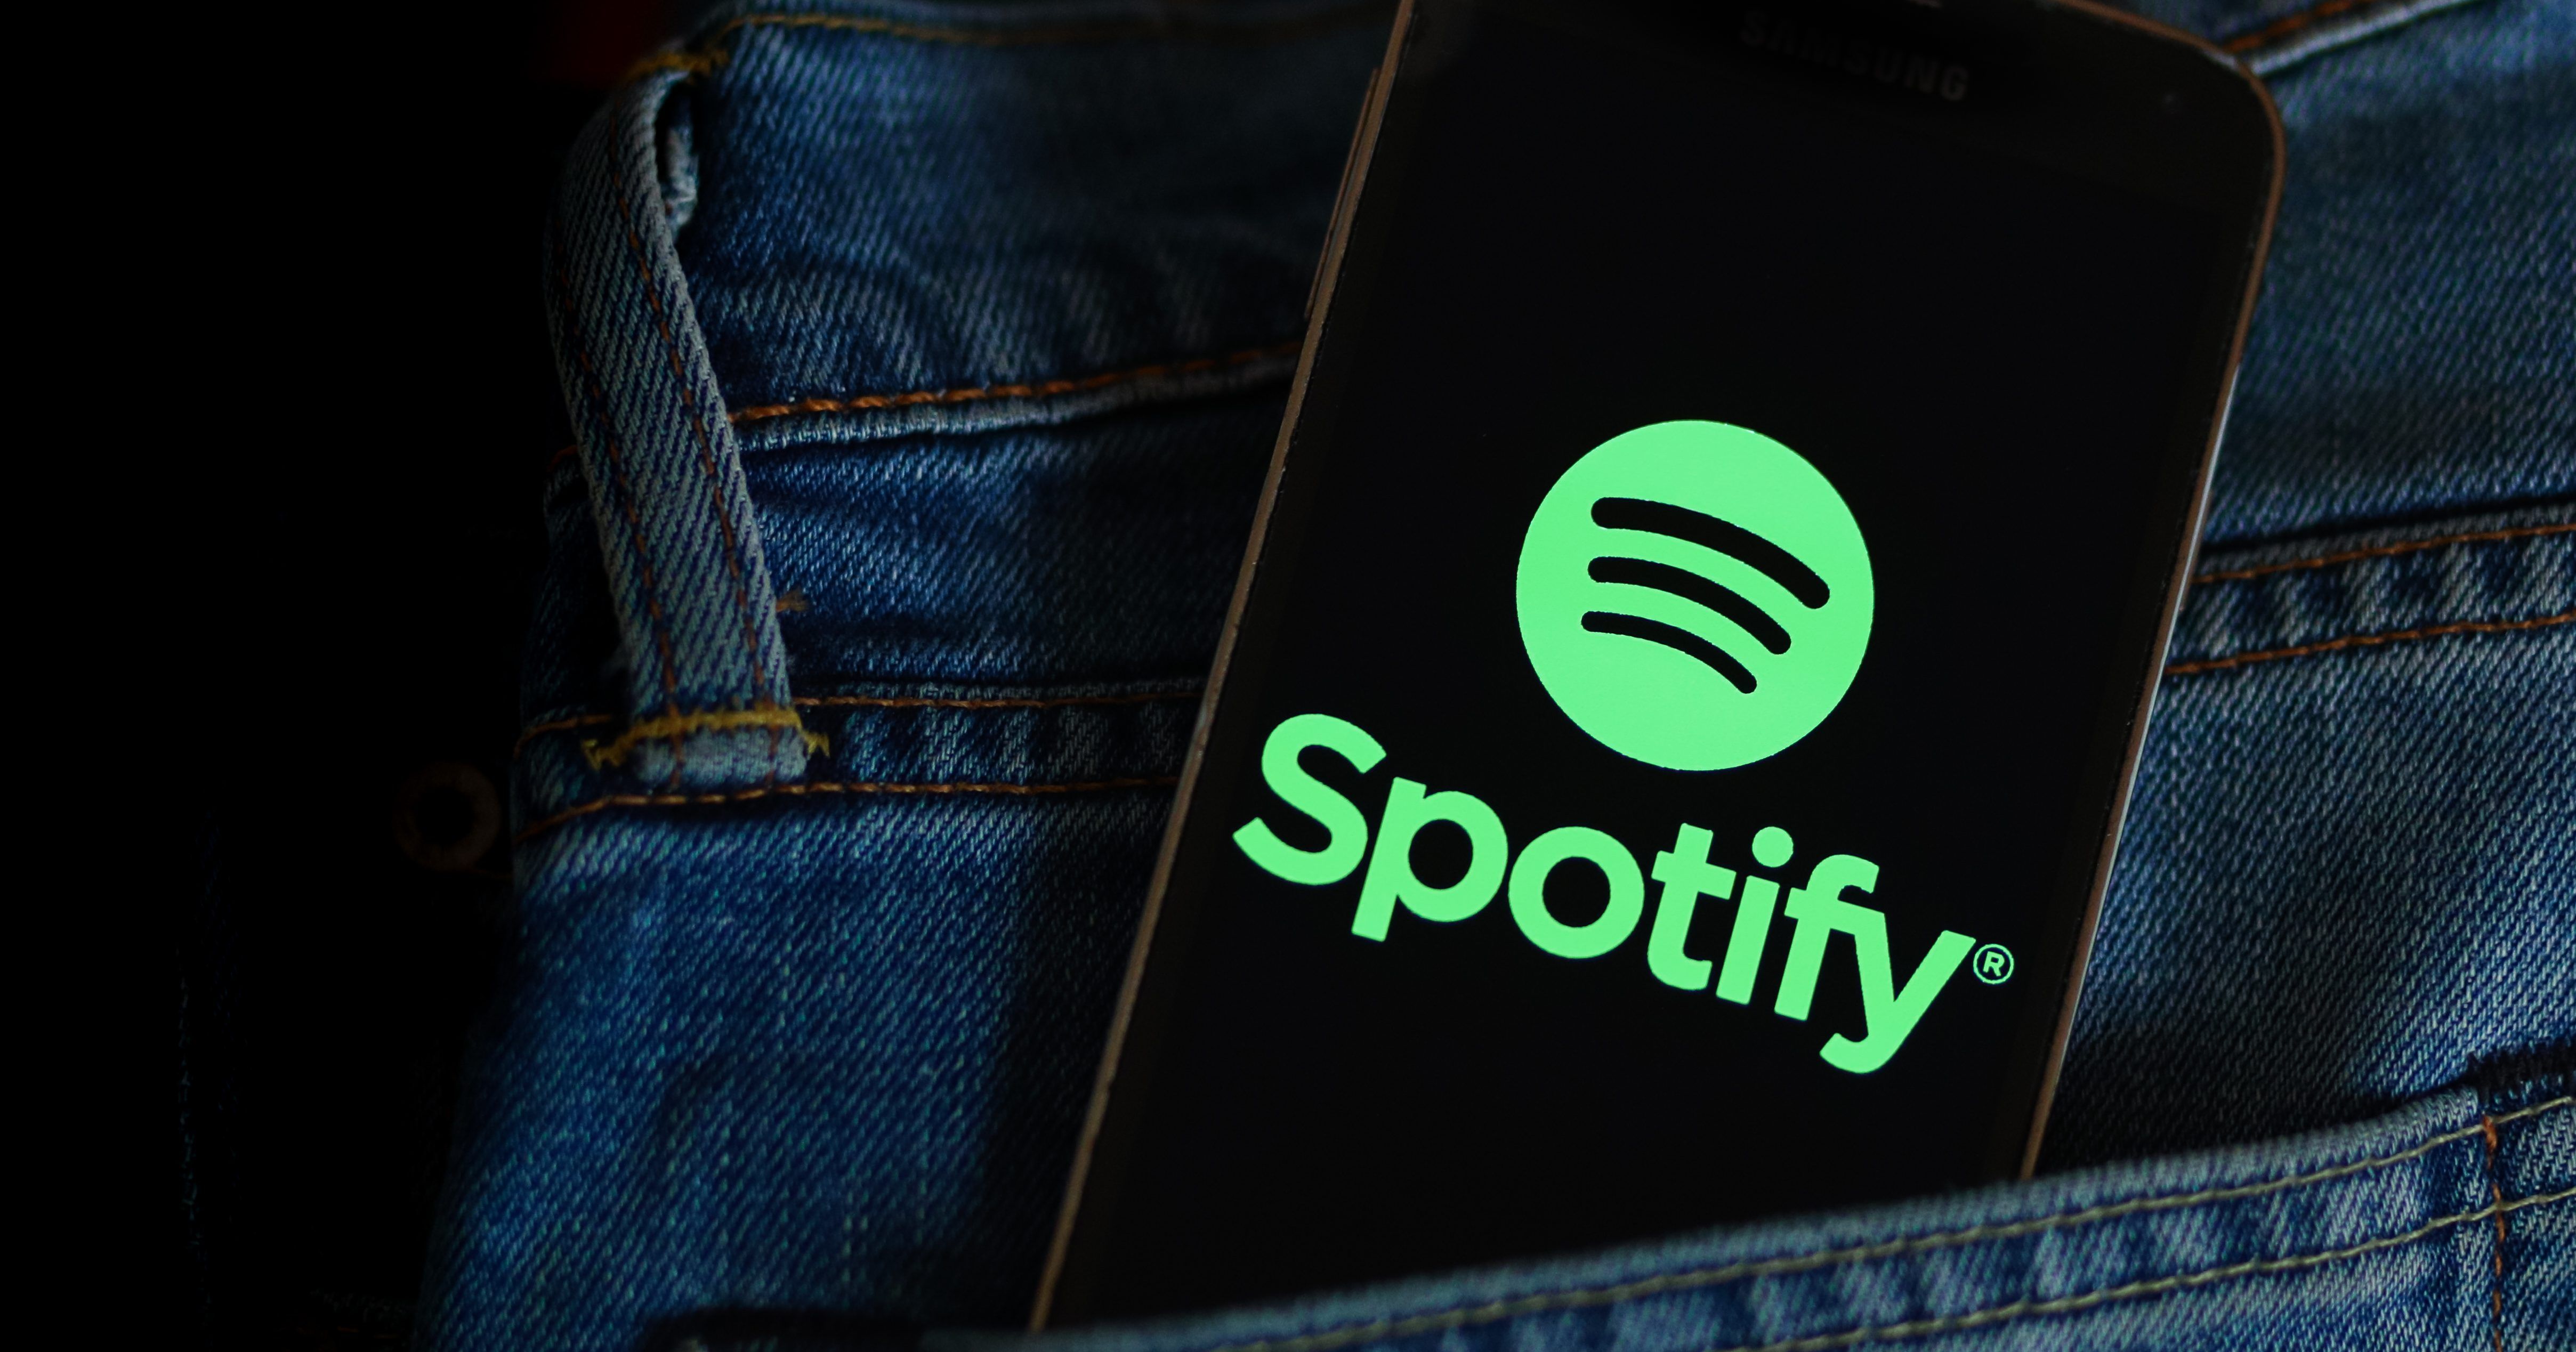 POLAND - 2021/03/22: In this photo illustration, a Spotify music app logo seen displayed on a smartphone. (Photo Illustration by Filip Radwanski/SOPA Images/LightRocket via Getty Images)